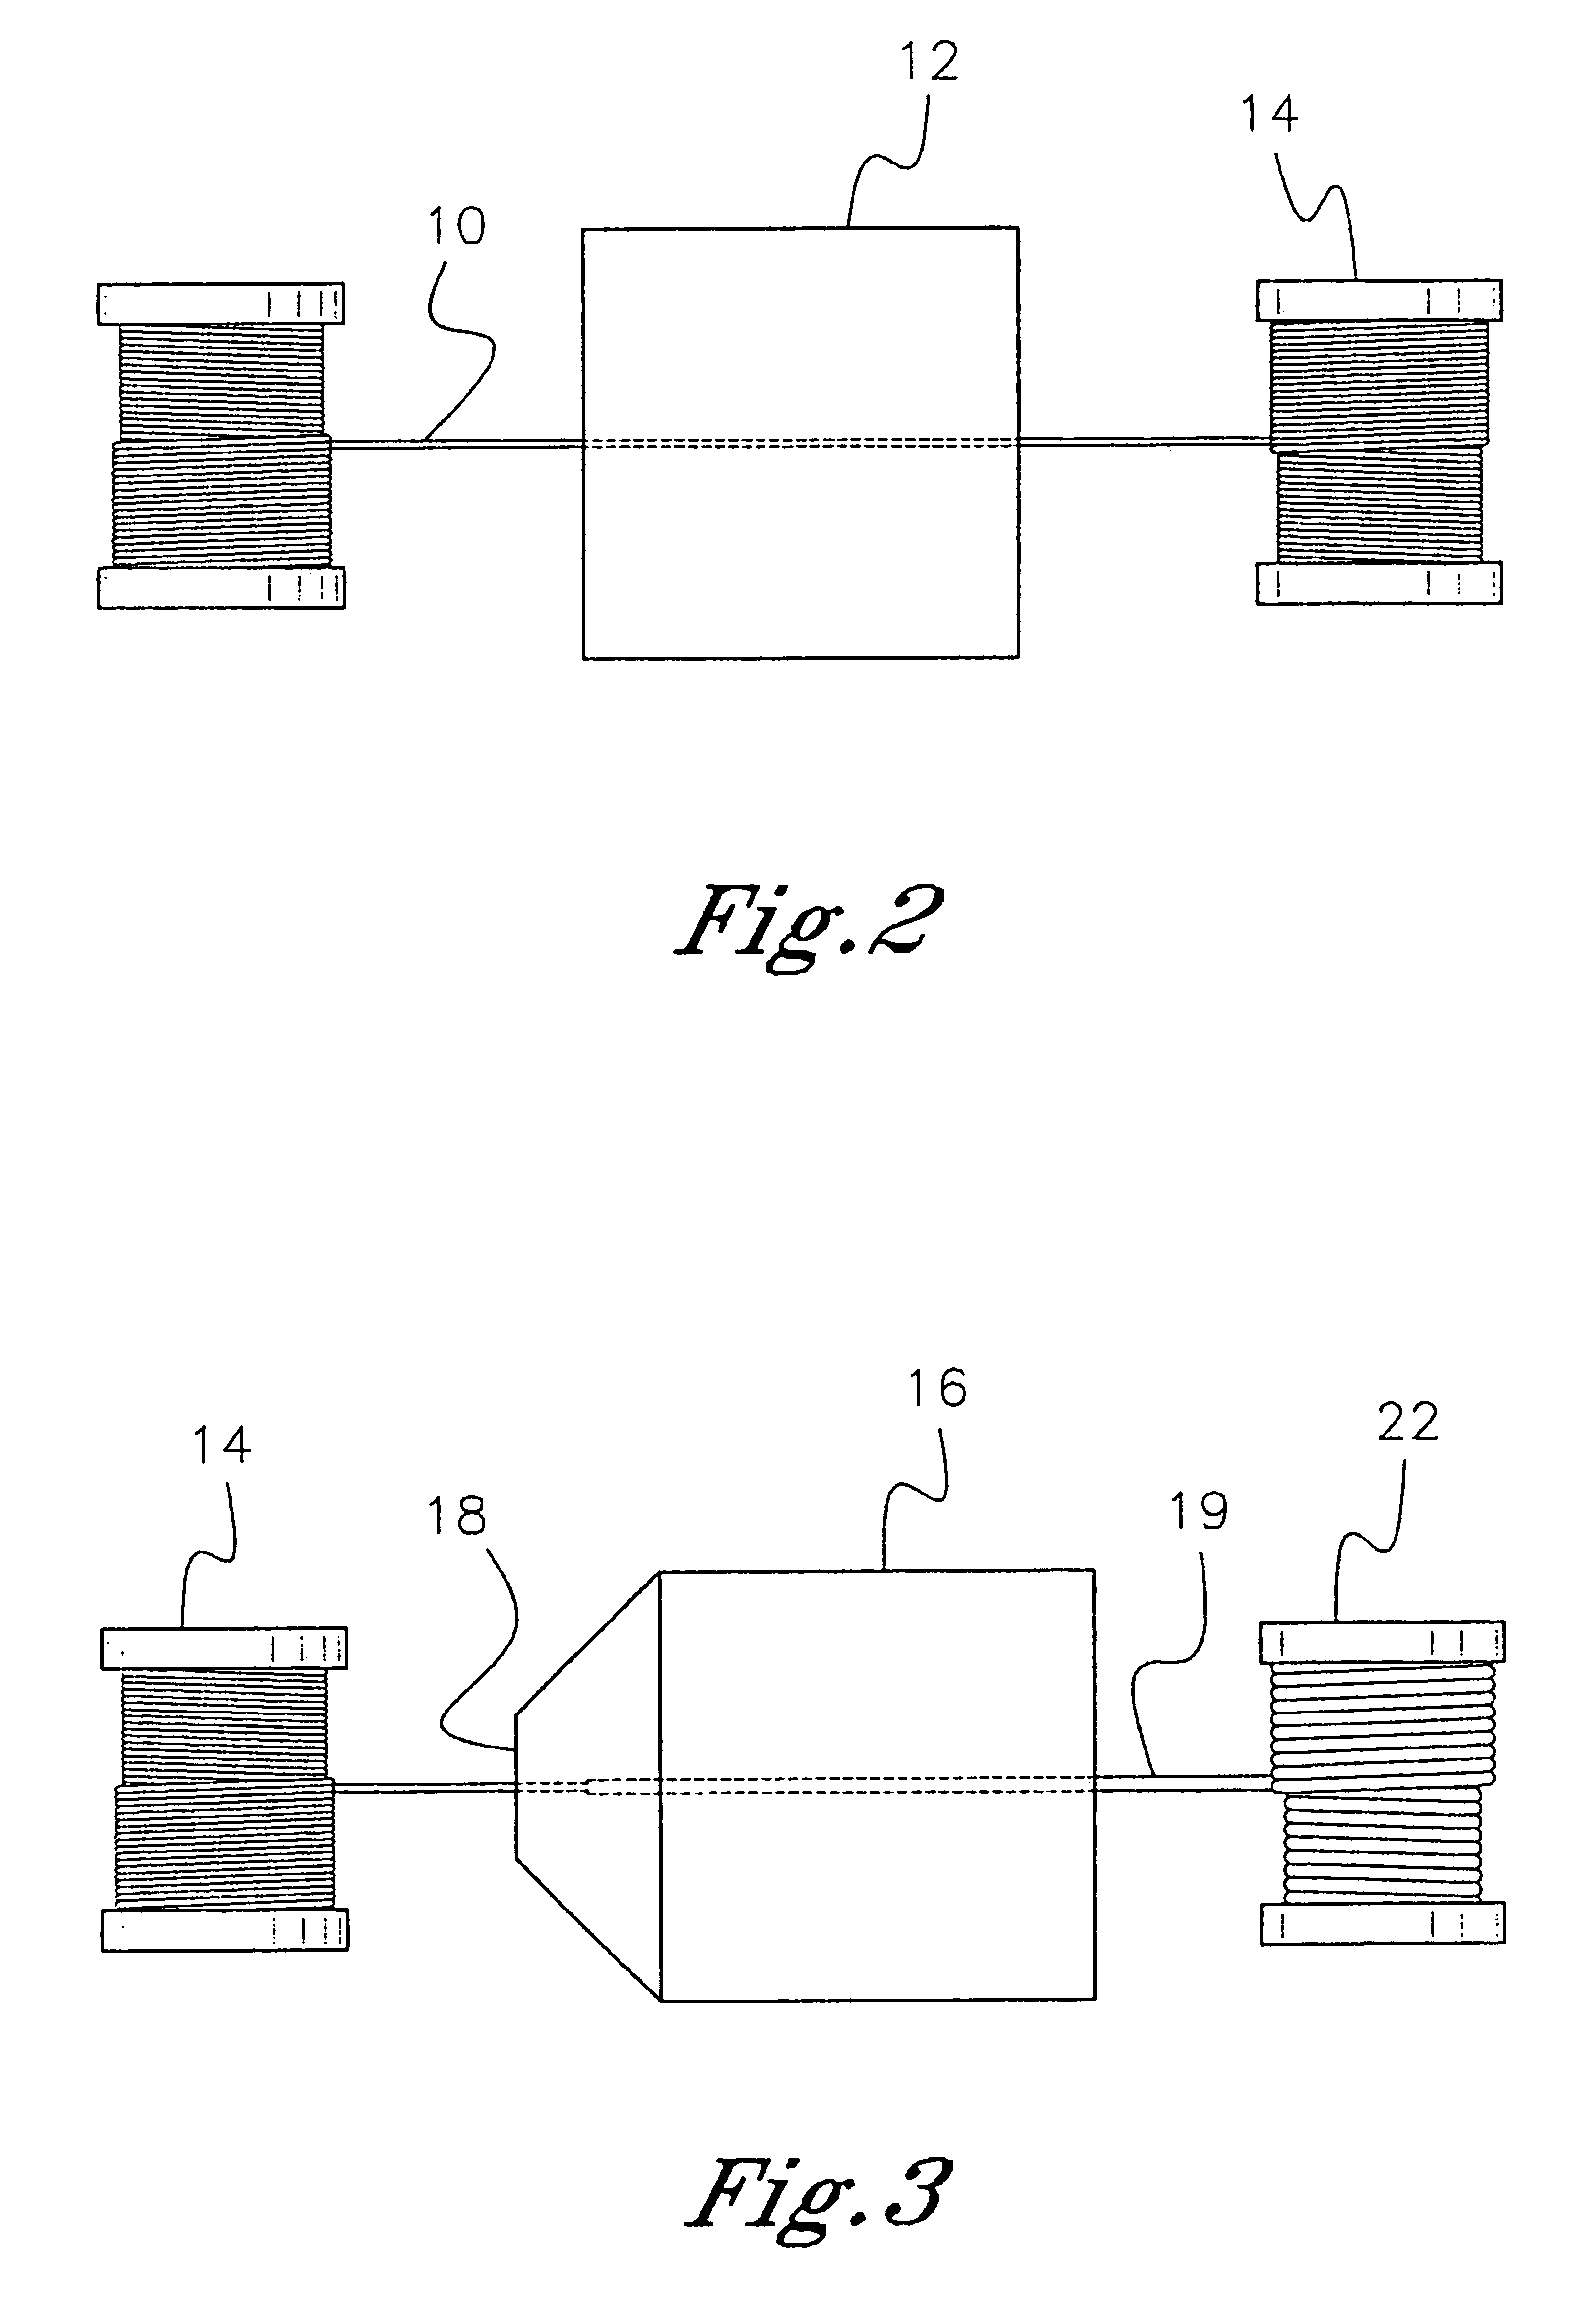 Method for manufacturing a wire stent coated with a biocompatible fluoropolymer